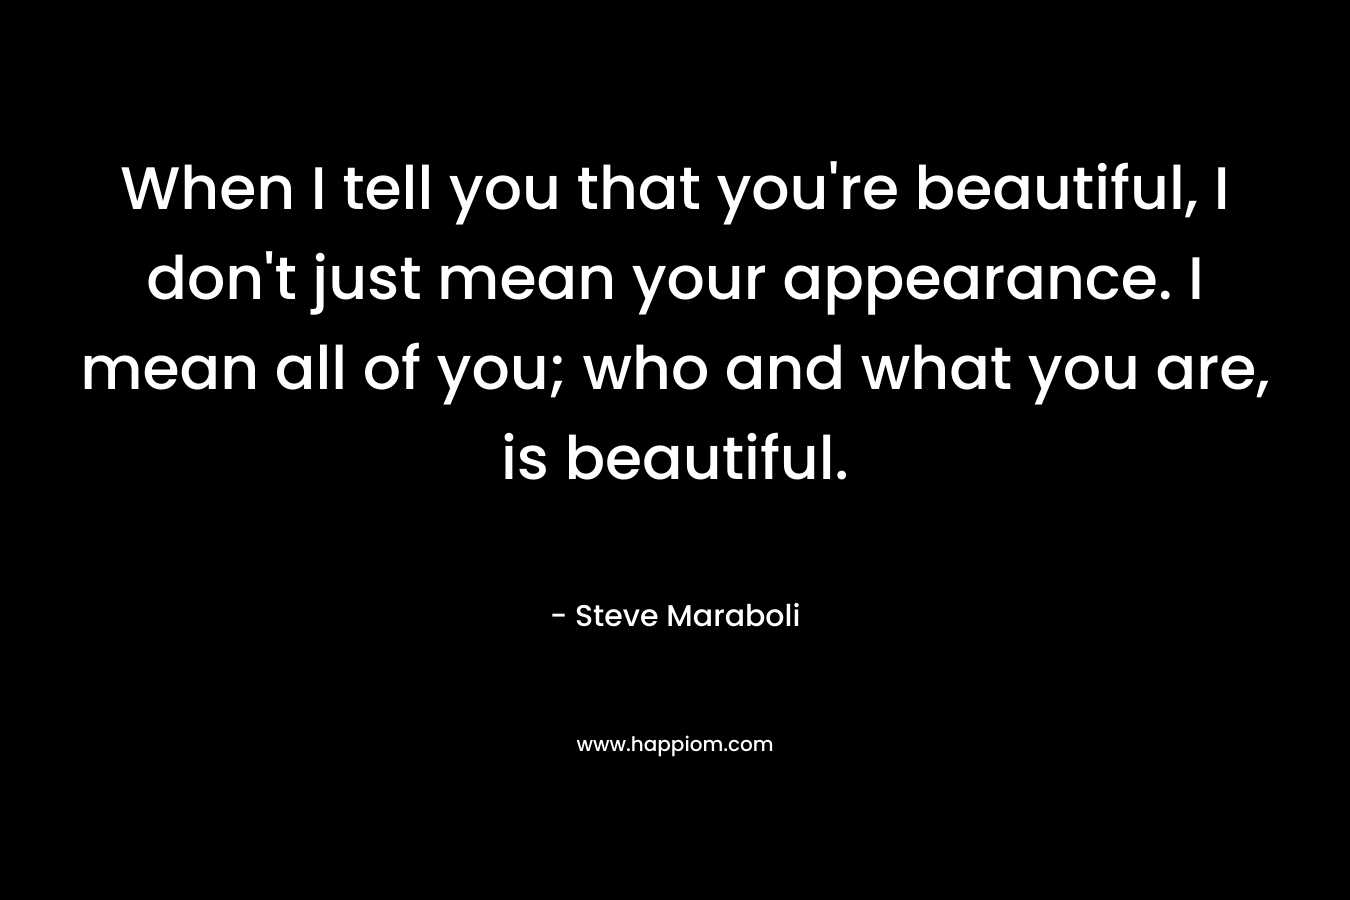 When I tell you that you're beautiful, I don't just mean your appearance. I mean all of you; who and what you are, is beautiful.